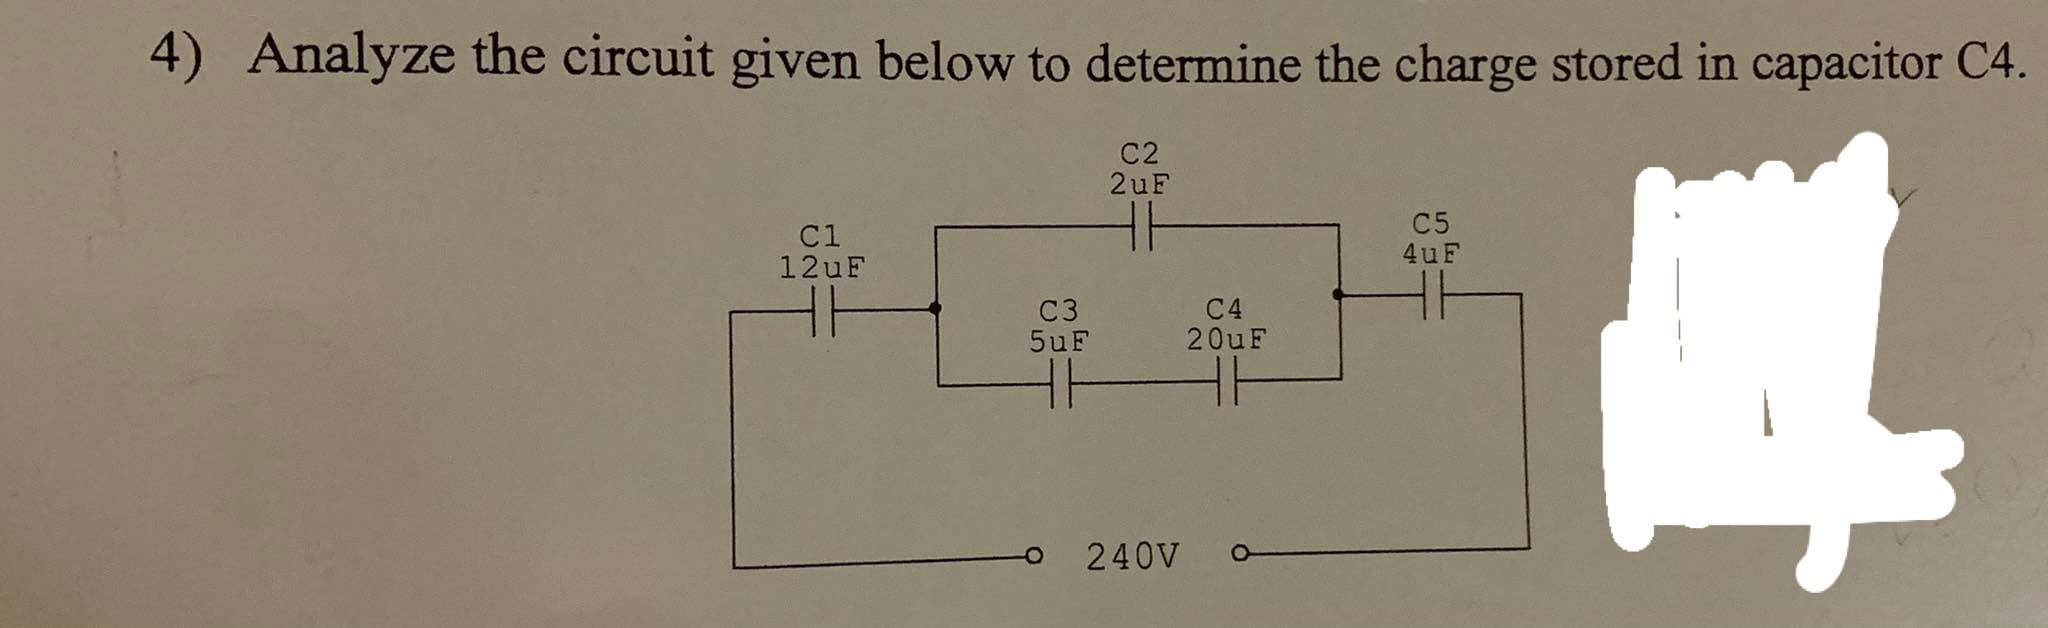 4) Analyze the circuit given below to determine the charge stored in capacitor C4.
C2
2uF
C1
12UF
C5
4uF
C3
5uF
C4
20uF
240V
